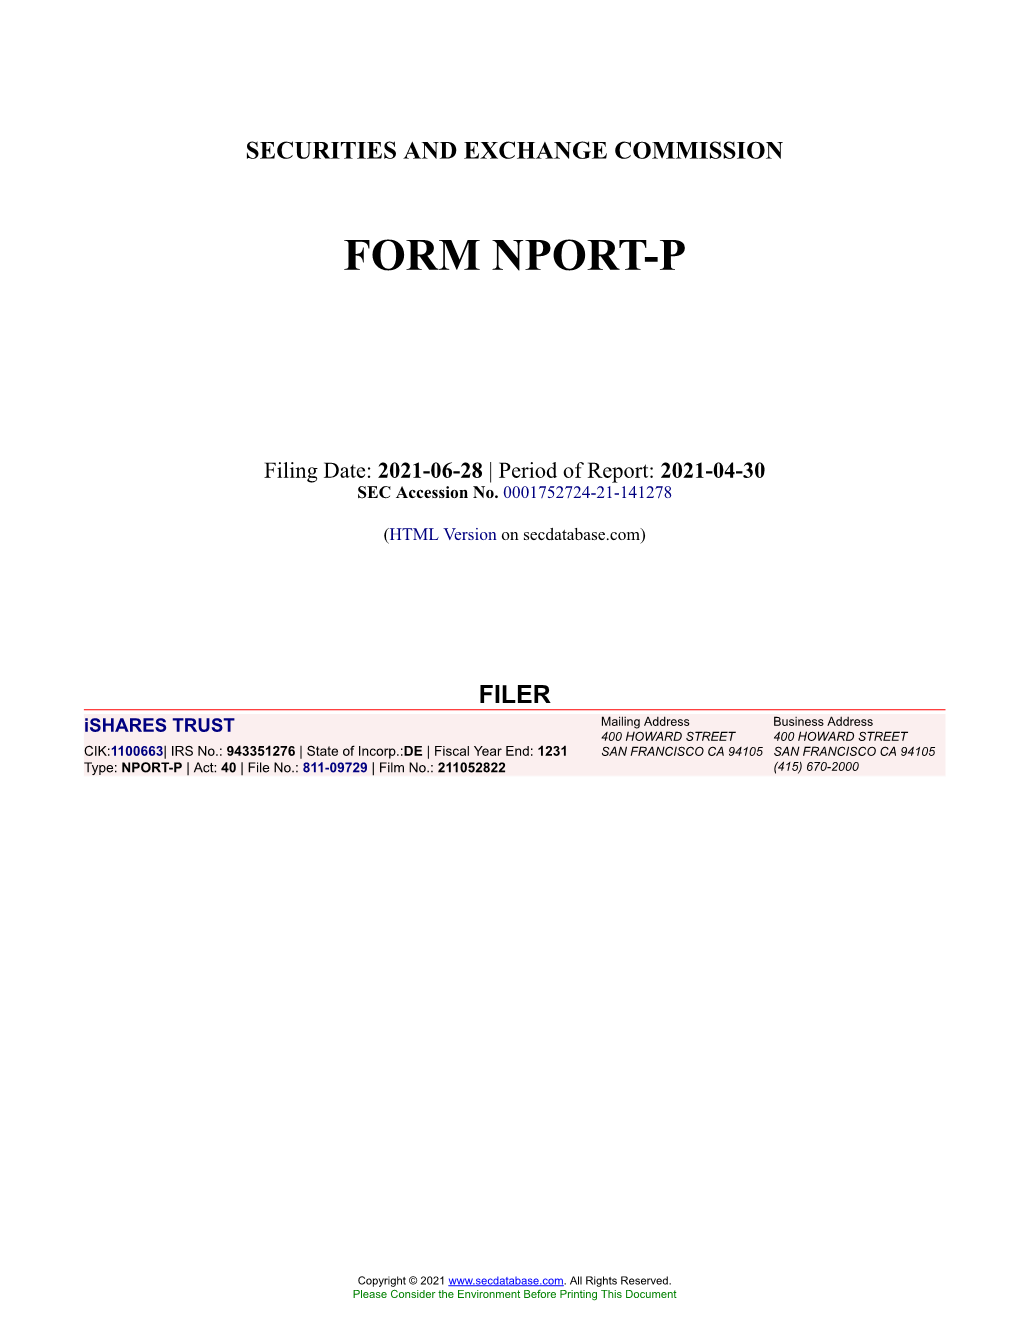 Ishares TRUST Form NPORT-P Filed 2021-06-28